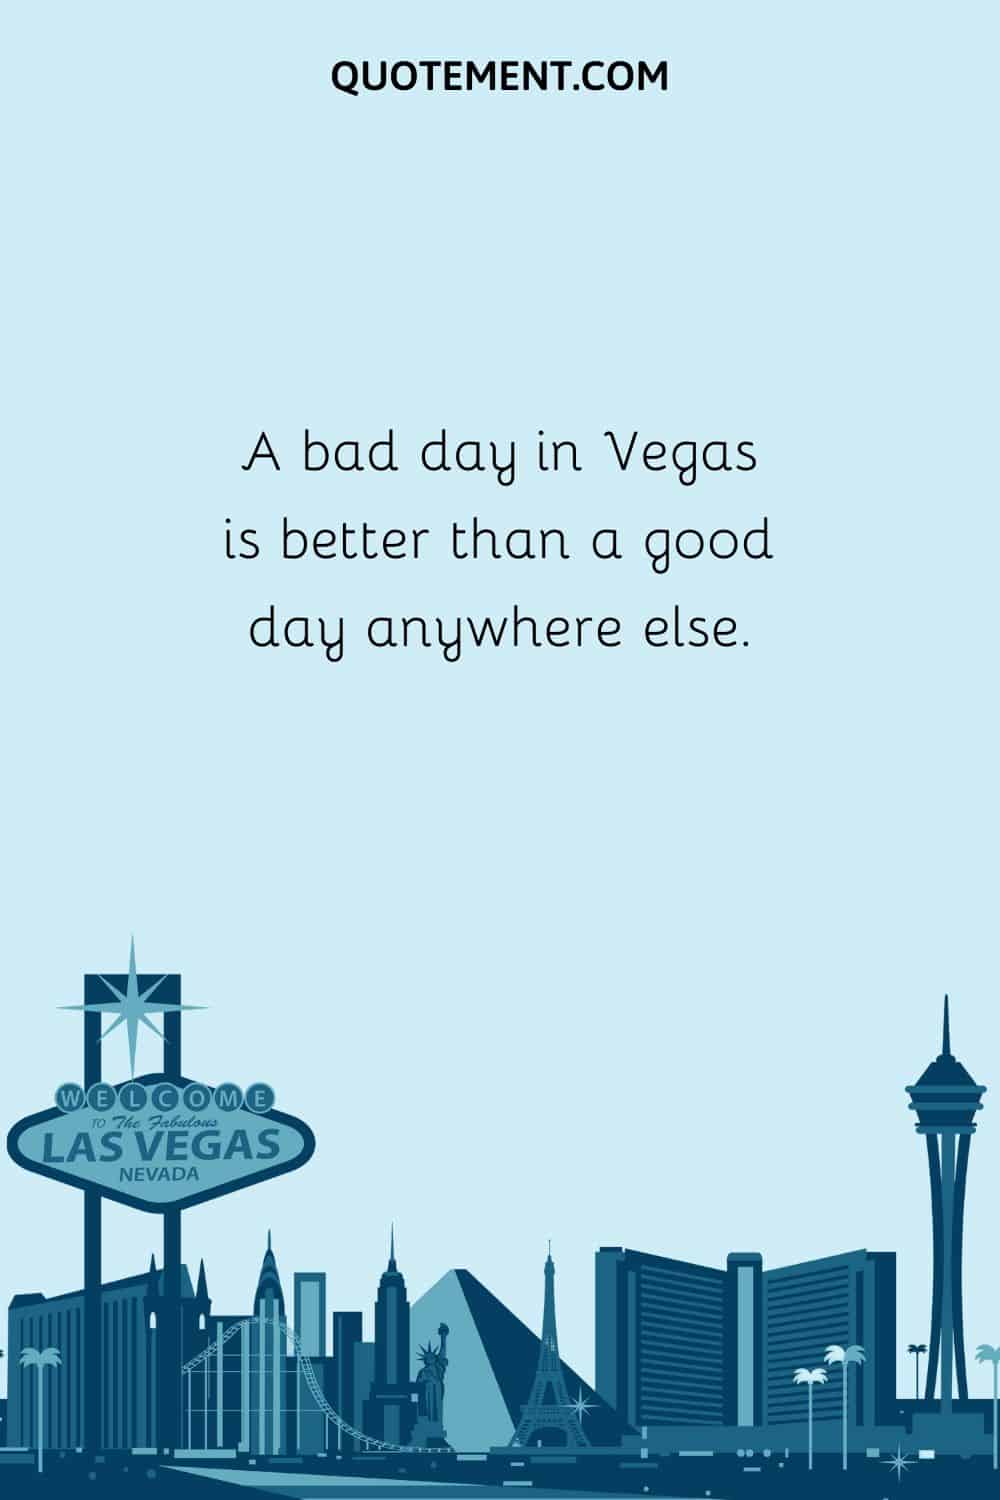 A bad day in Vegas is better than a good day anywhere else.